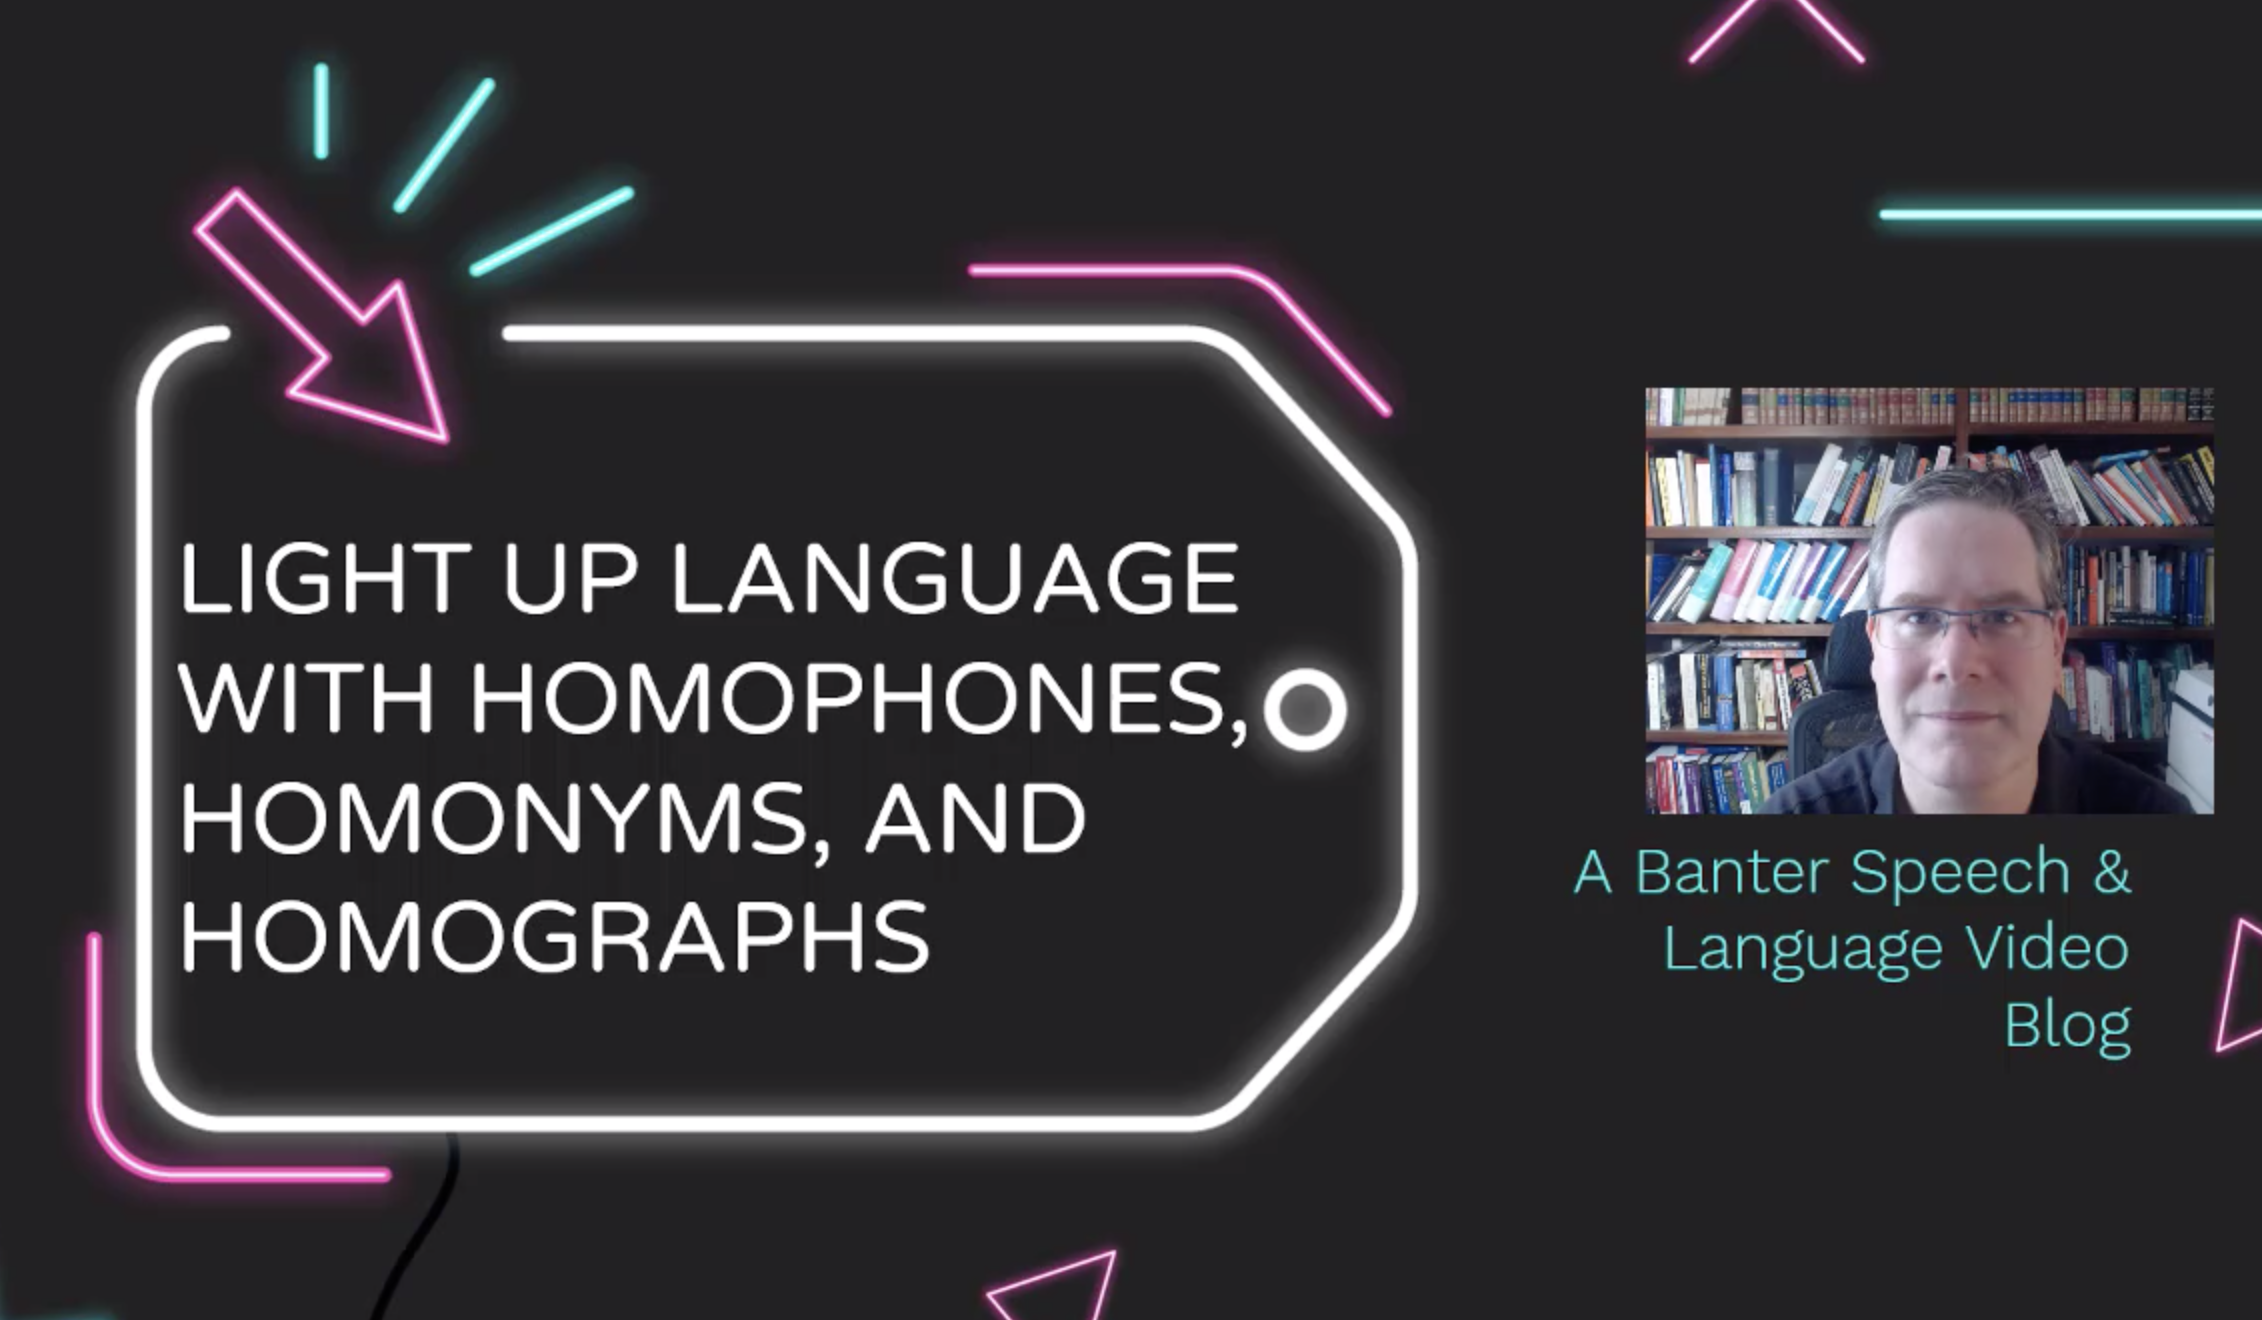 Light Up Language with Homophones, Homonyms, and Homographs